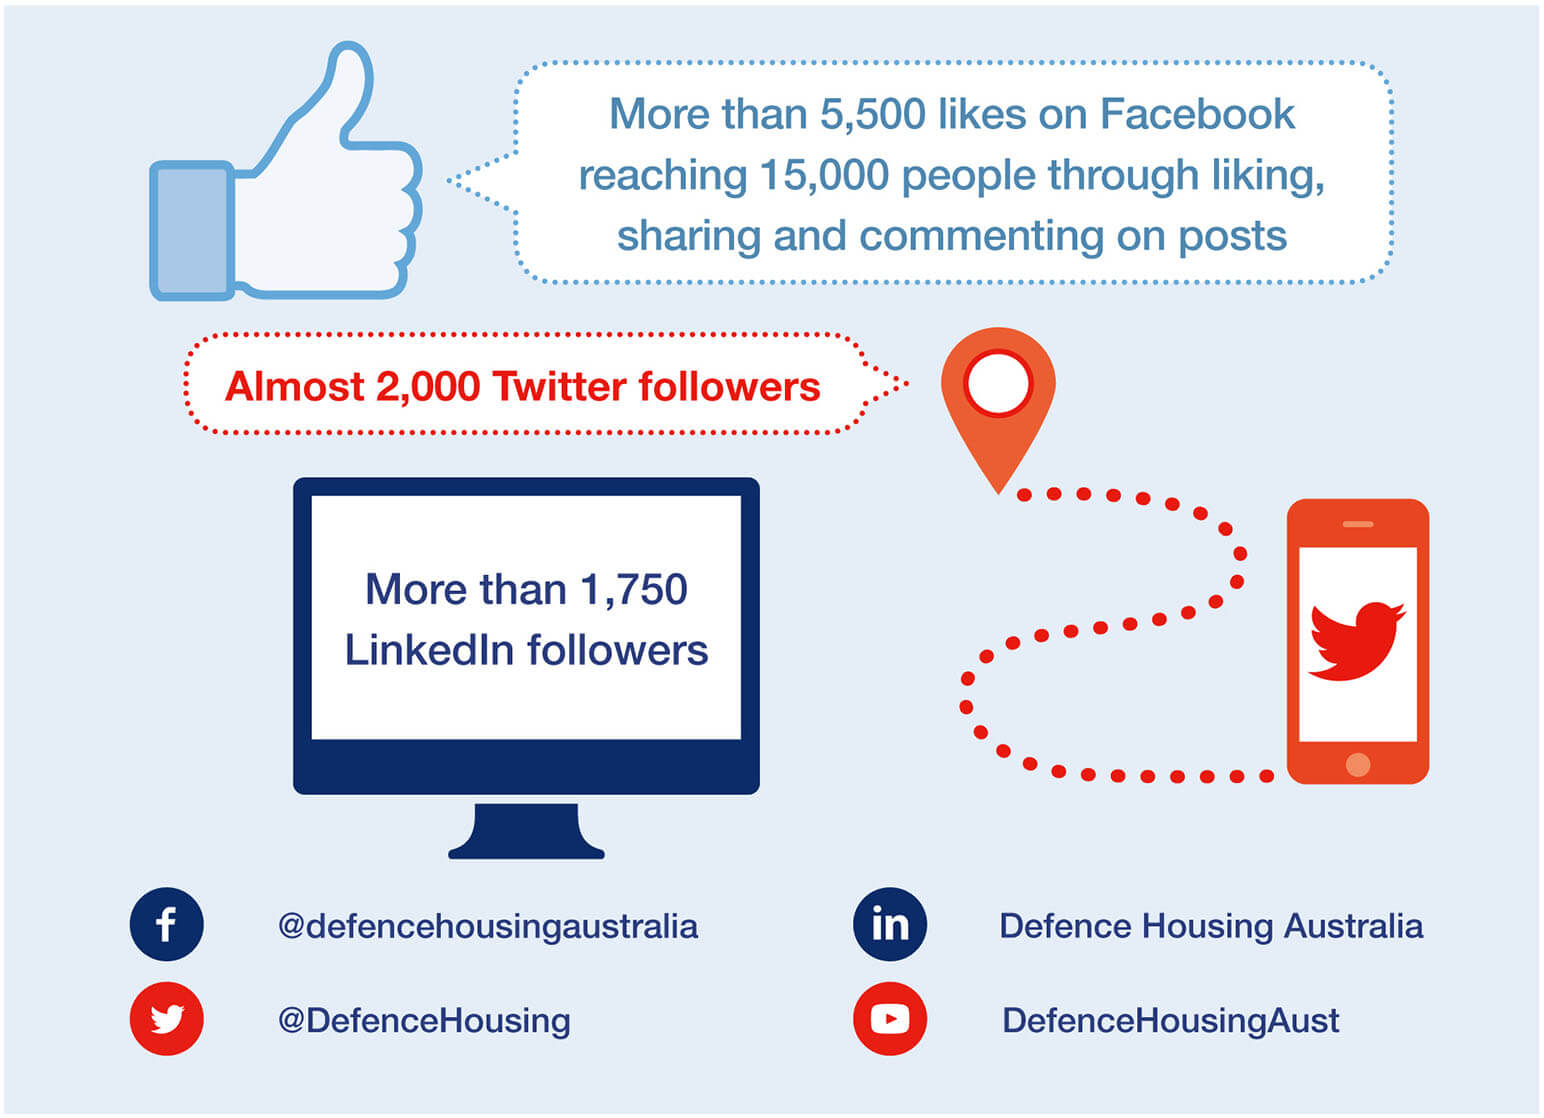 More than 5,500 likes on Facebook reaching 15,000 people through liking, sharing and commenting on posts. Almost 2,000 Twitter followers. More than 1,750 LinkedIn followers